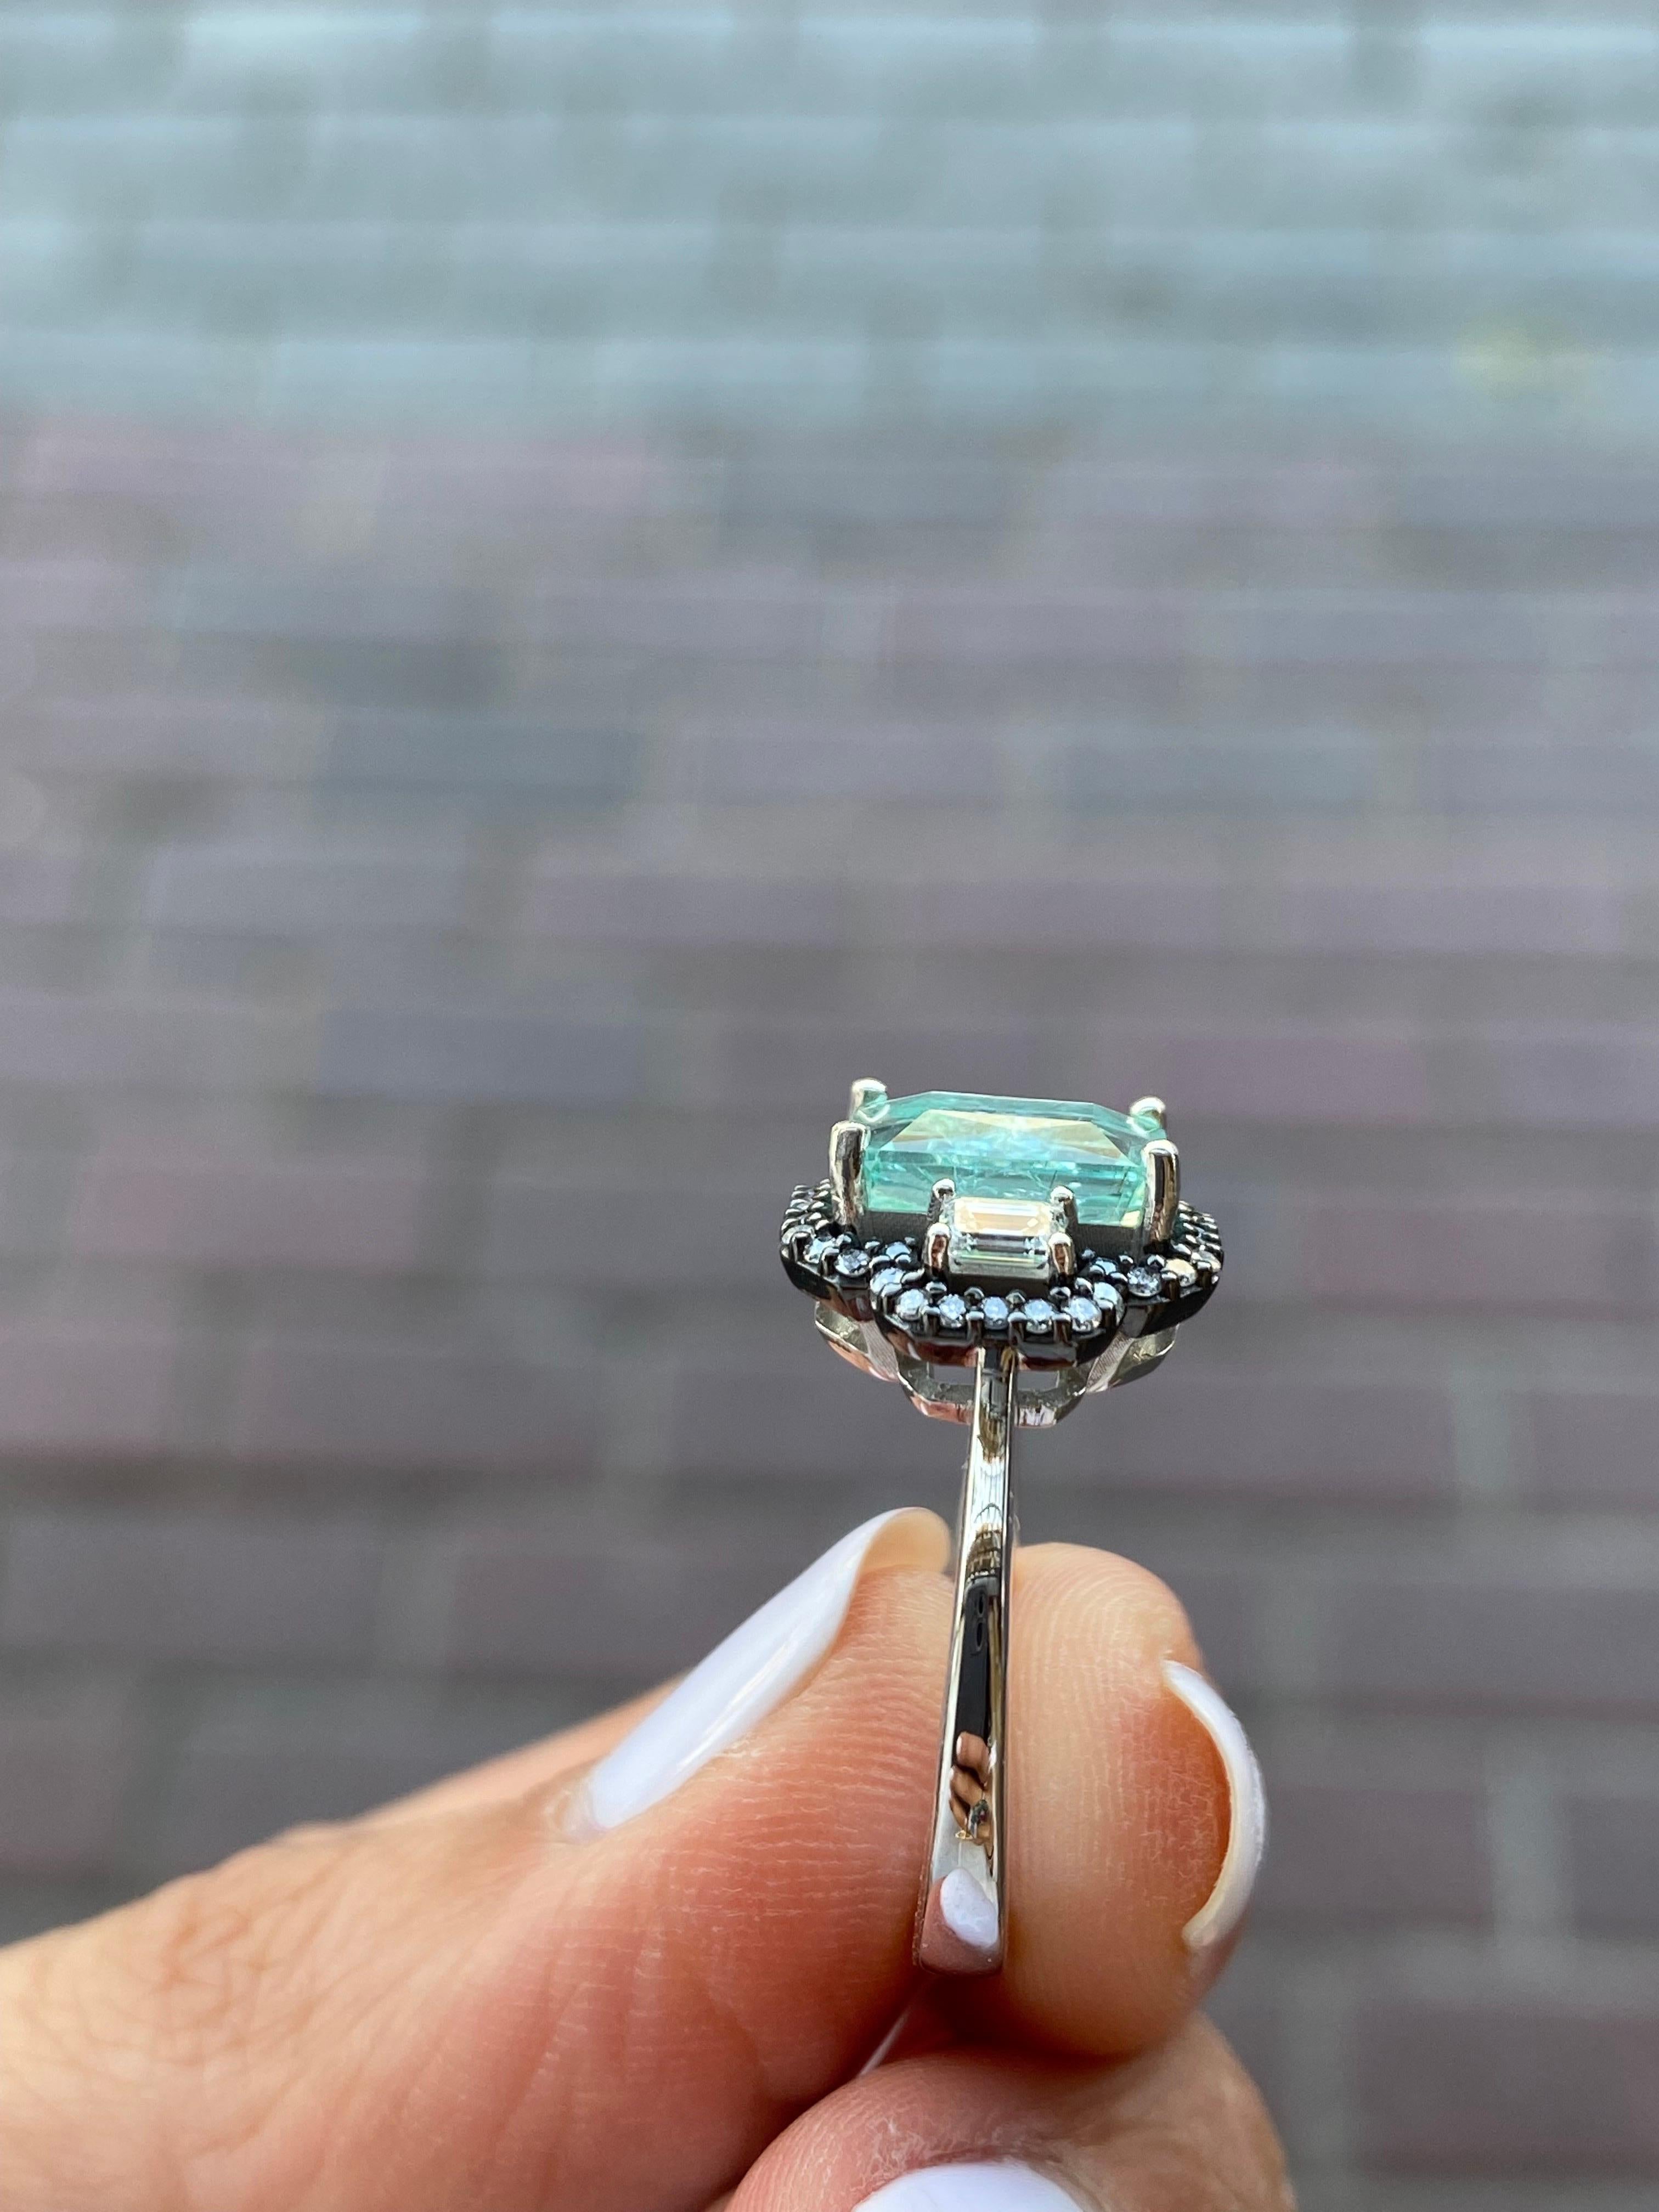 A beautiful combination of 2.71 carat emerald cut Blue Paraiba center stone ring with 0.3 carat VS quality emerald cut Diamond side stones and 0.24 carat brilliant cut Diamond ring, set in solid 18K gold polished in rhodium. The combination of black